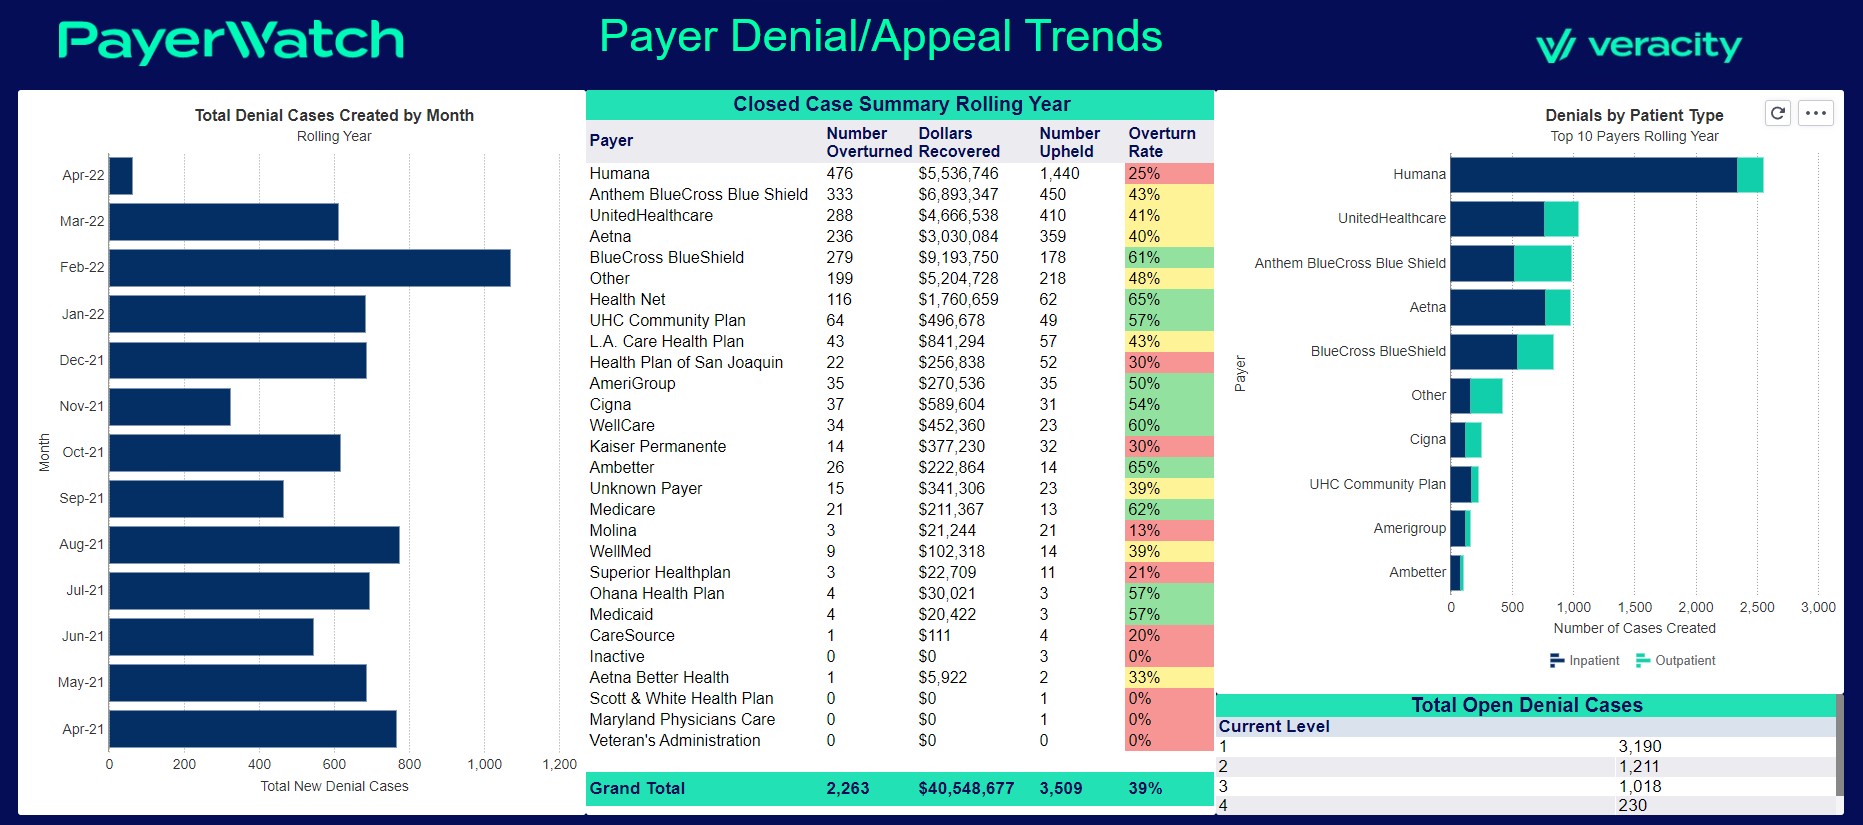 PayerWatch Provider Software Solutions Veracity Report Payer Denial Appeal Trends tn